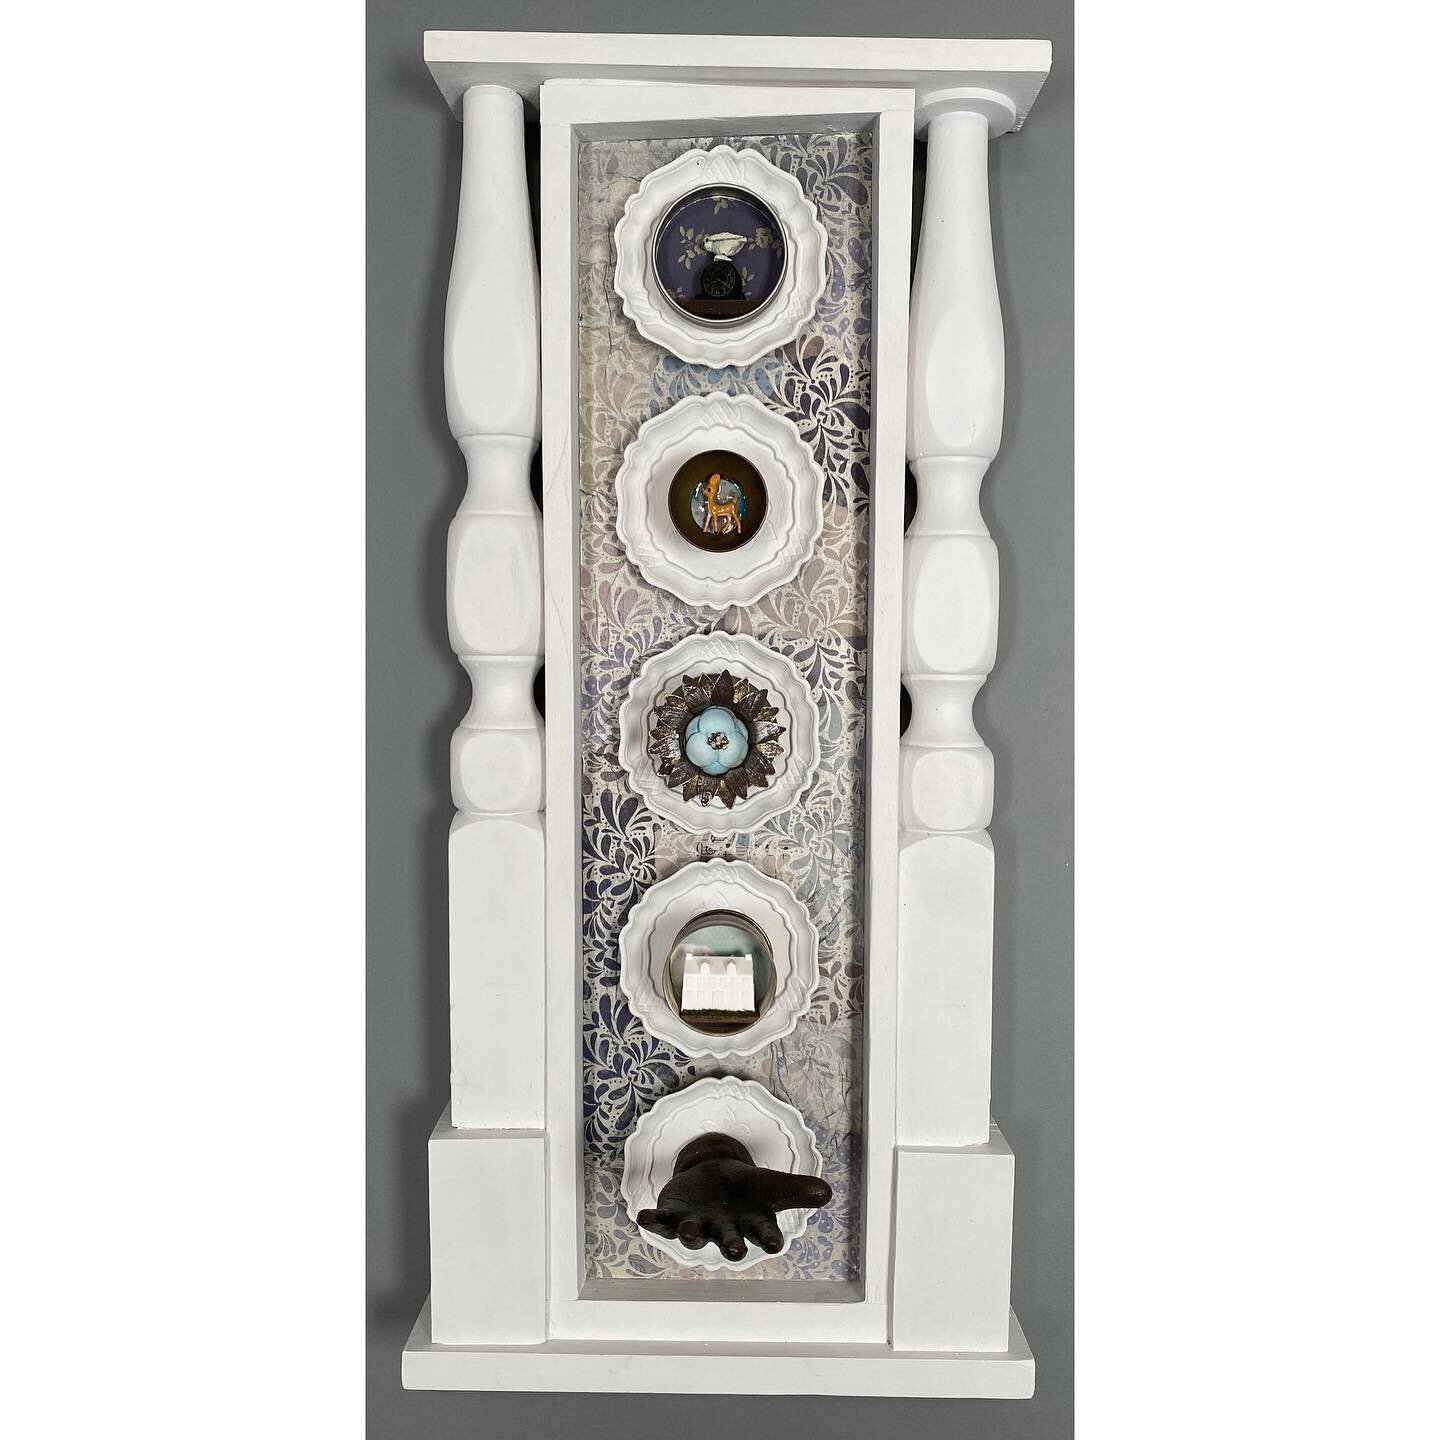 This piece was inspired by a few Agatha Christie novels. 

&ldquo;The Secret Night at Devon&rdquo;, 2023

#agathachristie #mysteryinspired #herculepoirot #assemblageart #assemblagesculpture #ohioartist #foundobjects